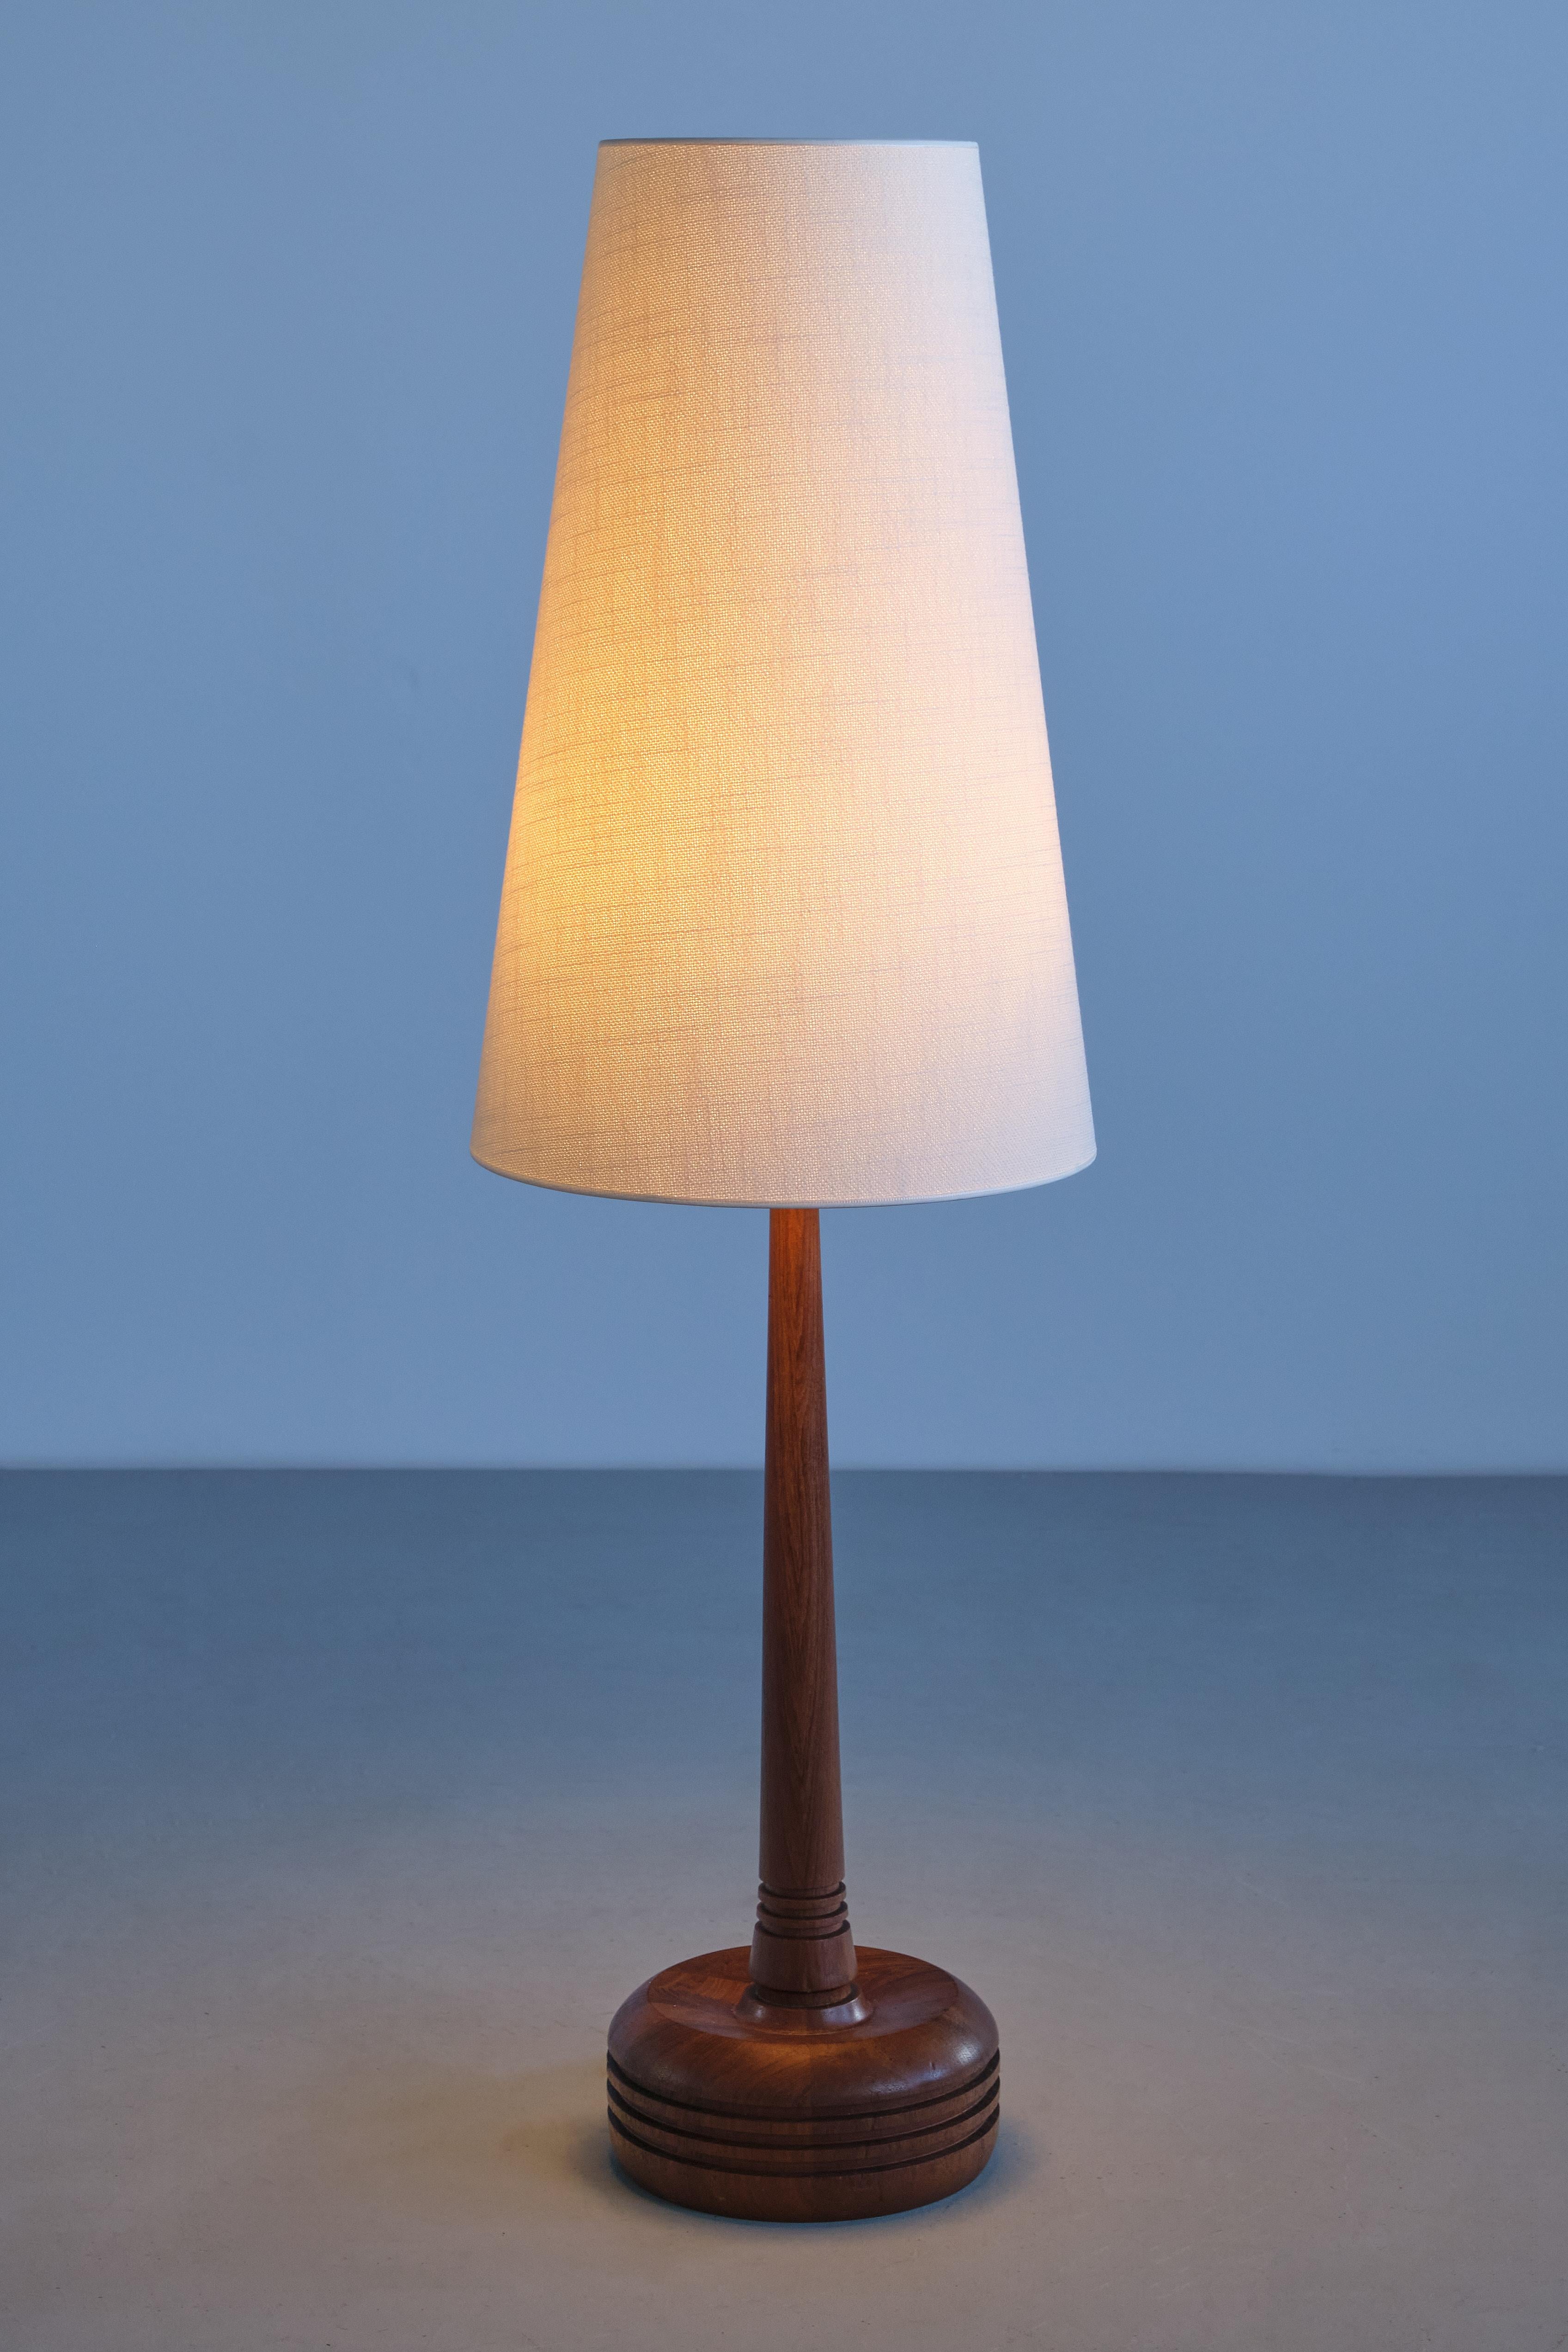 Tall Stilarmatur Tranås Table Lamp in Teak Wood with Cone Shade, Sweden, 1960s For Sale 2